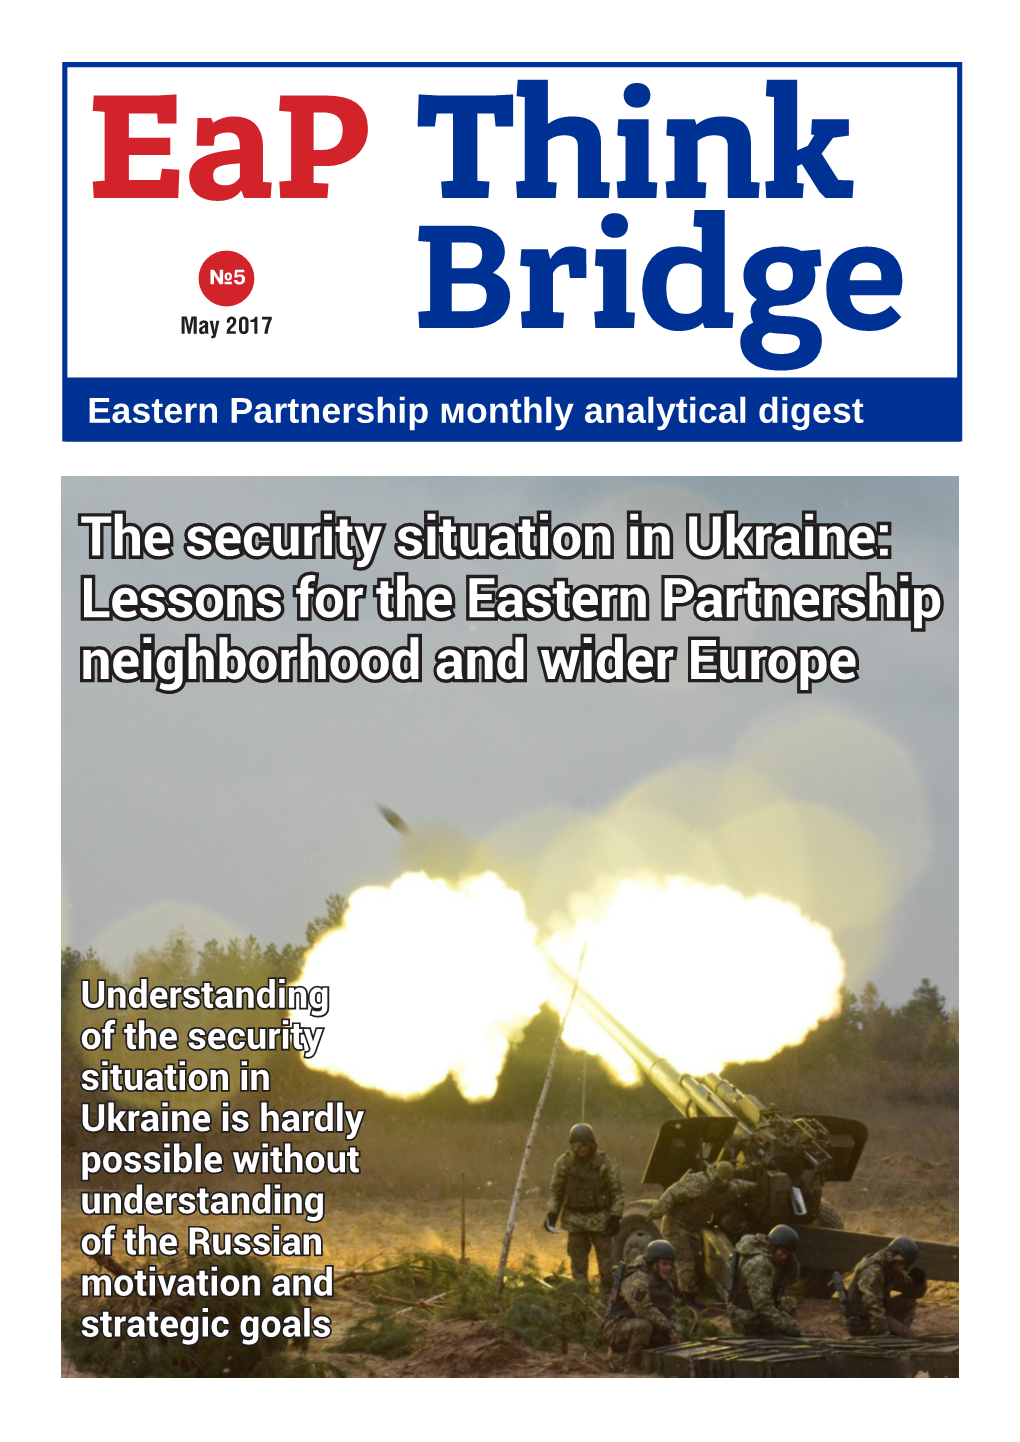 The Security Situation in Ukraine: Lessons for the Eastern Partnership Neighborhood and Wider Europe